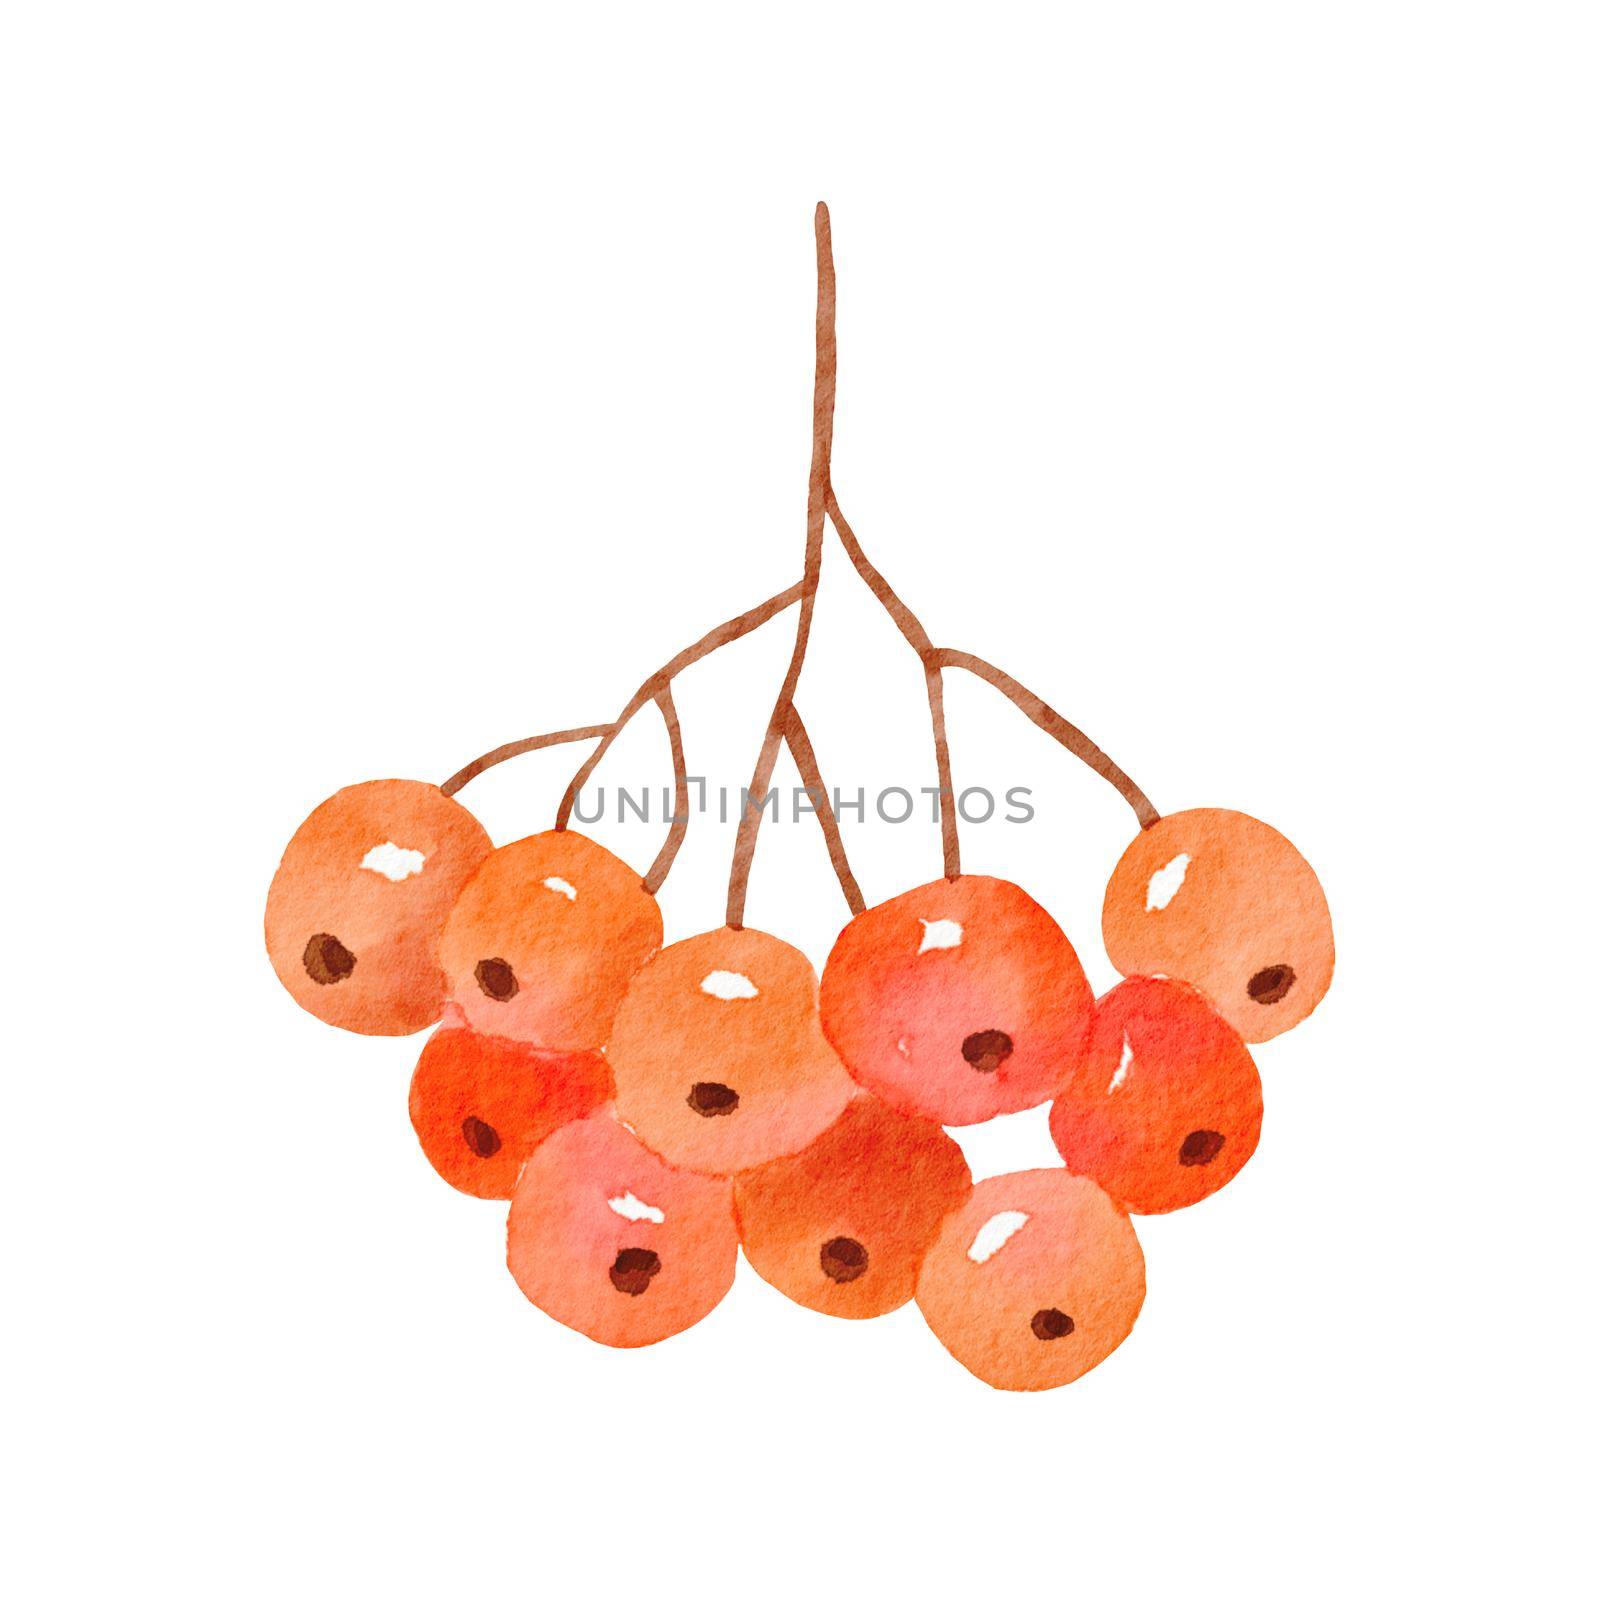 Watercolor illustration of rowan. Bright red branch with berries. Hand drawn fall plant isolated on white background by ElenaPlatova